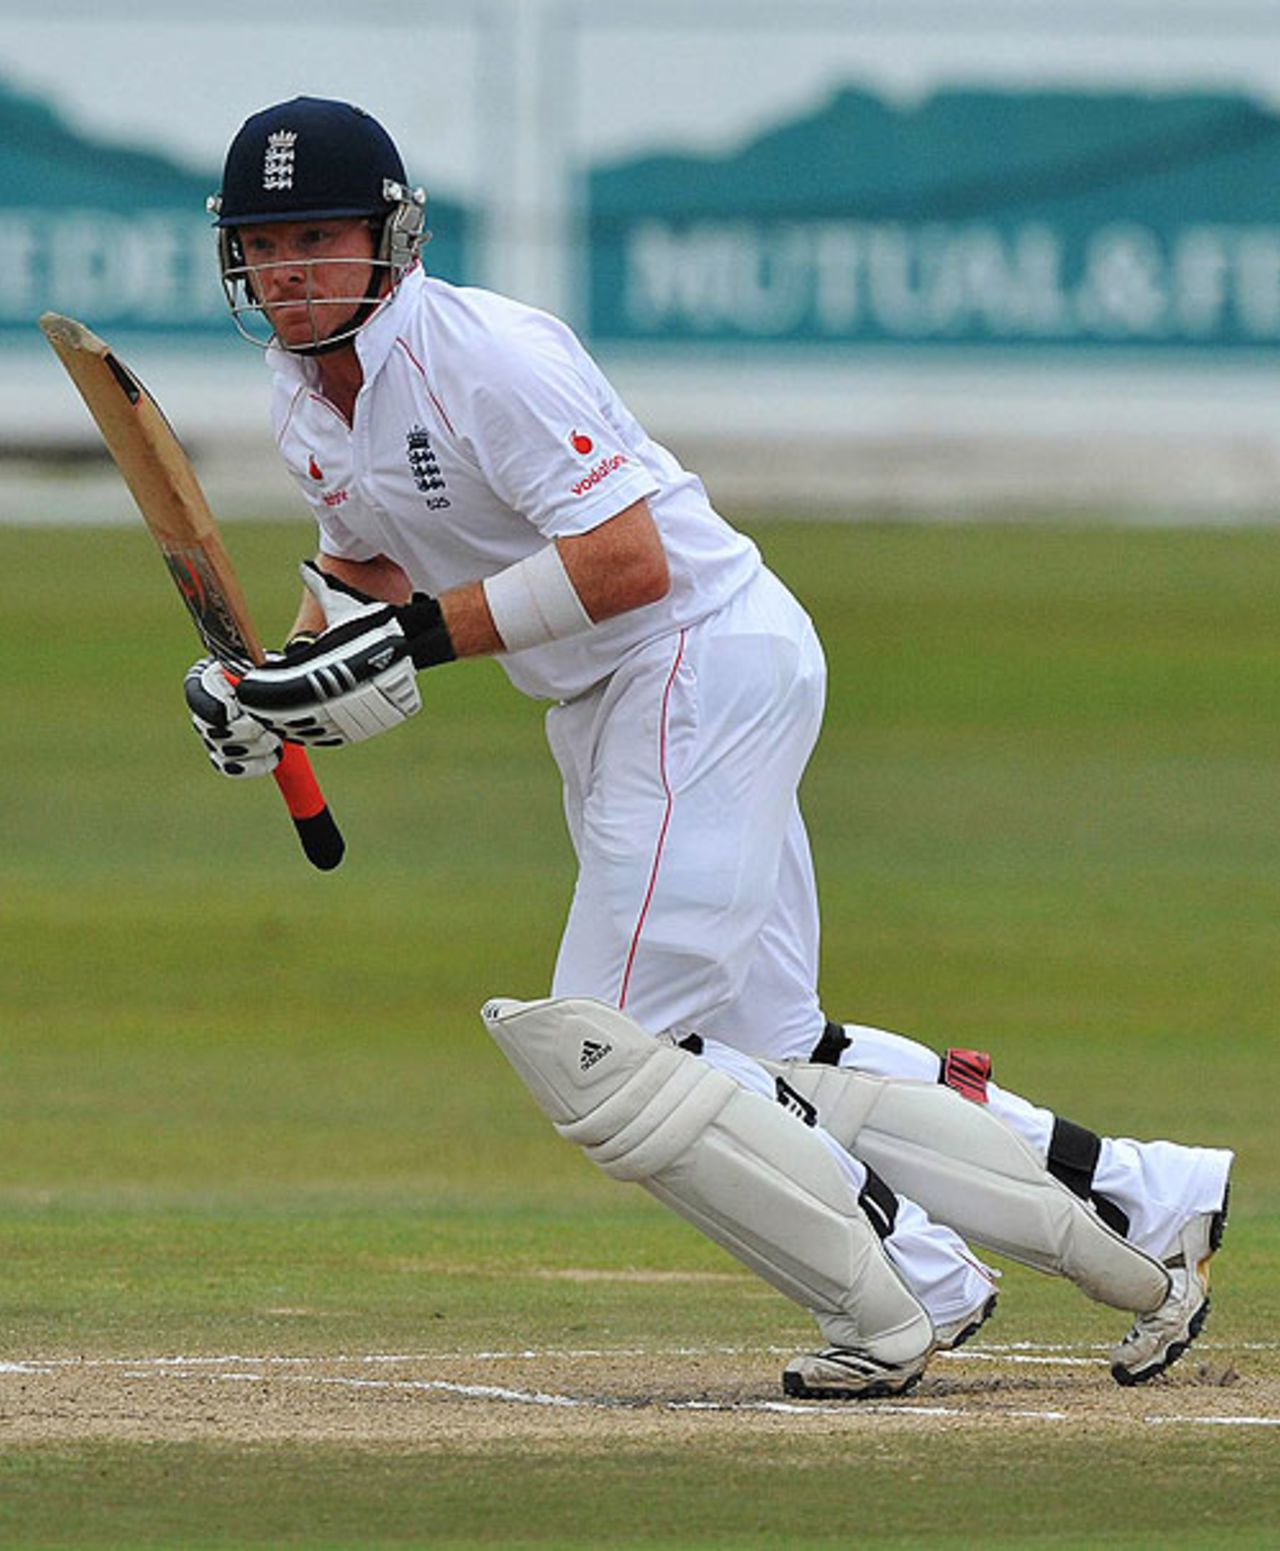 Ian Bell built on his overnight 55 to bring up his ninth Test century, as England built a healthy first-innings lead, South Africa v England, 2nd Test, Durban, December 29, 2009 